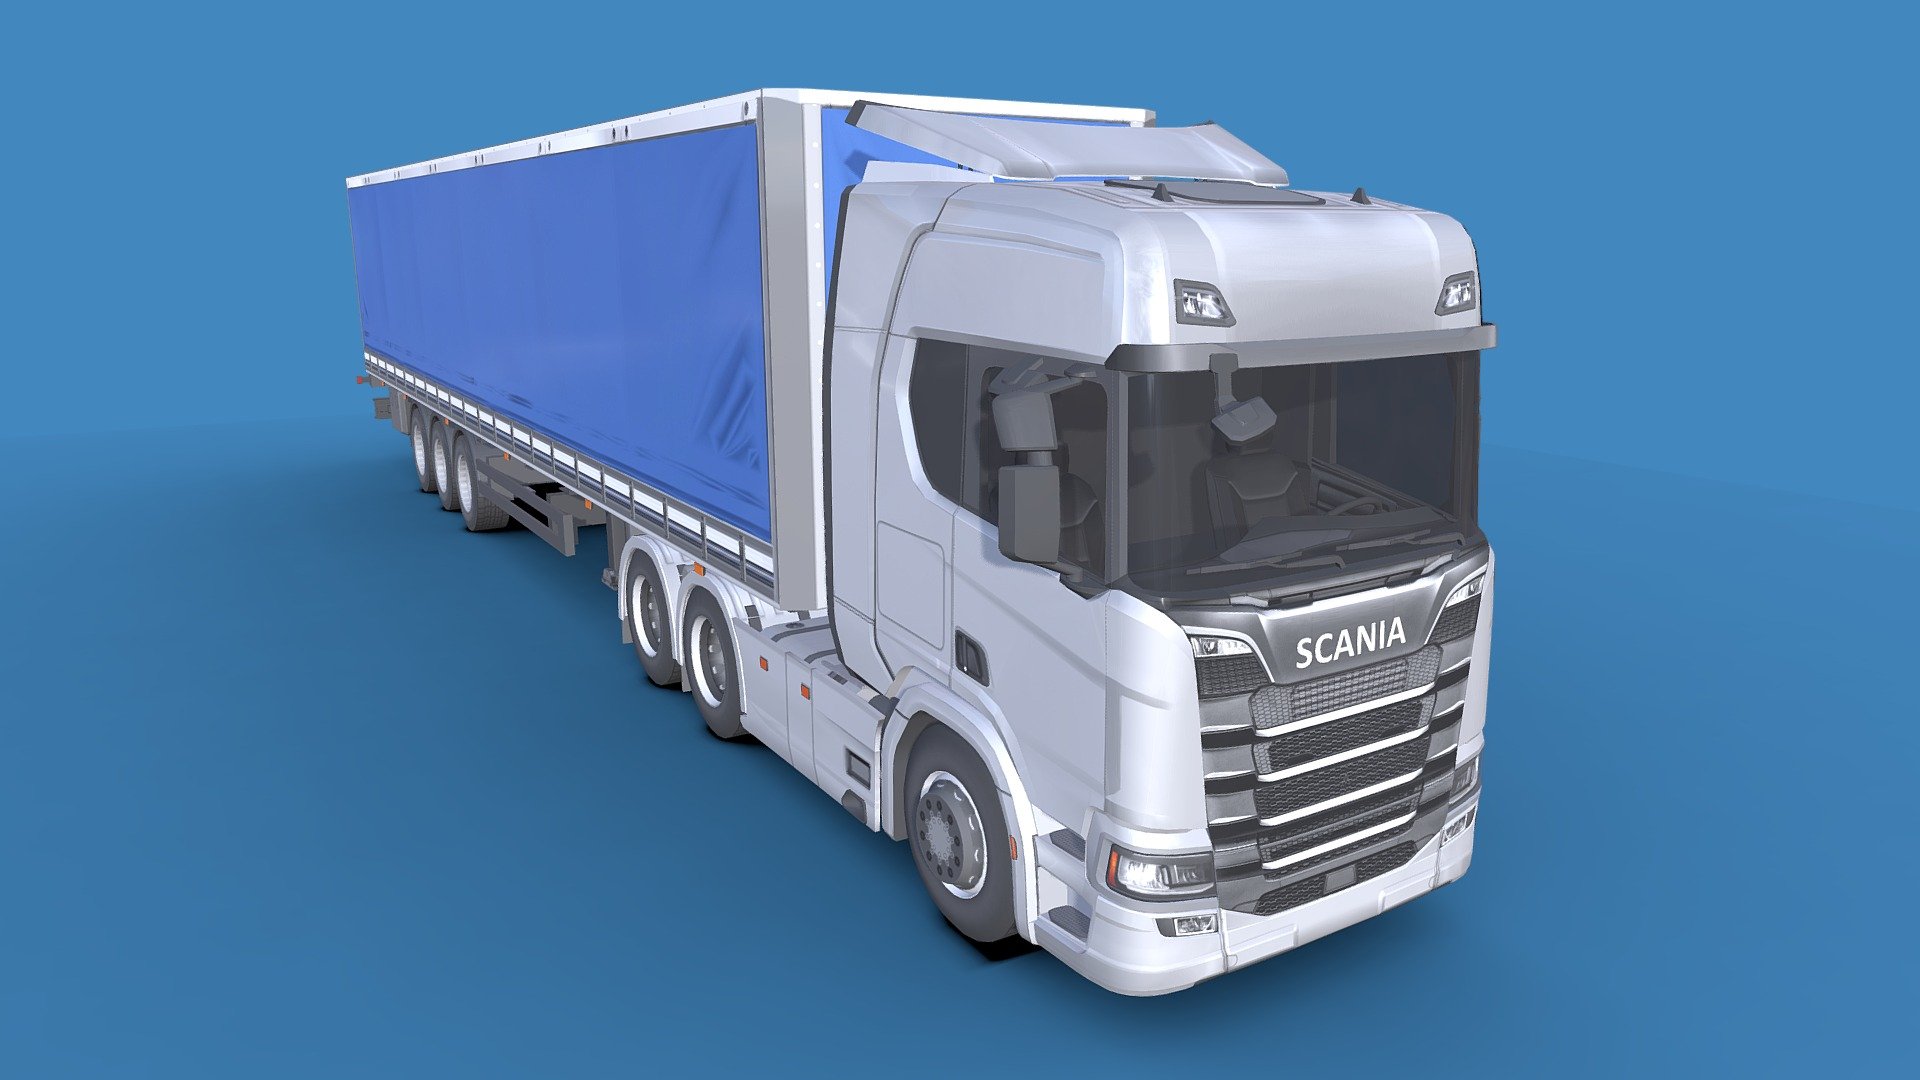 Scania Truck 

Low-poly

Average poly count : 40,000

Average number of vertices : 44,000

Textures : 4096 / 2048

Formats .( FBX , OBJ , 3D MAX ).

High quality texture.

Isolated parts (Door, steering wheel, wheels, body).

Its dashboard is simple.

You can use this model in all games 3d model